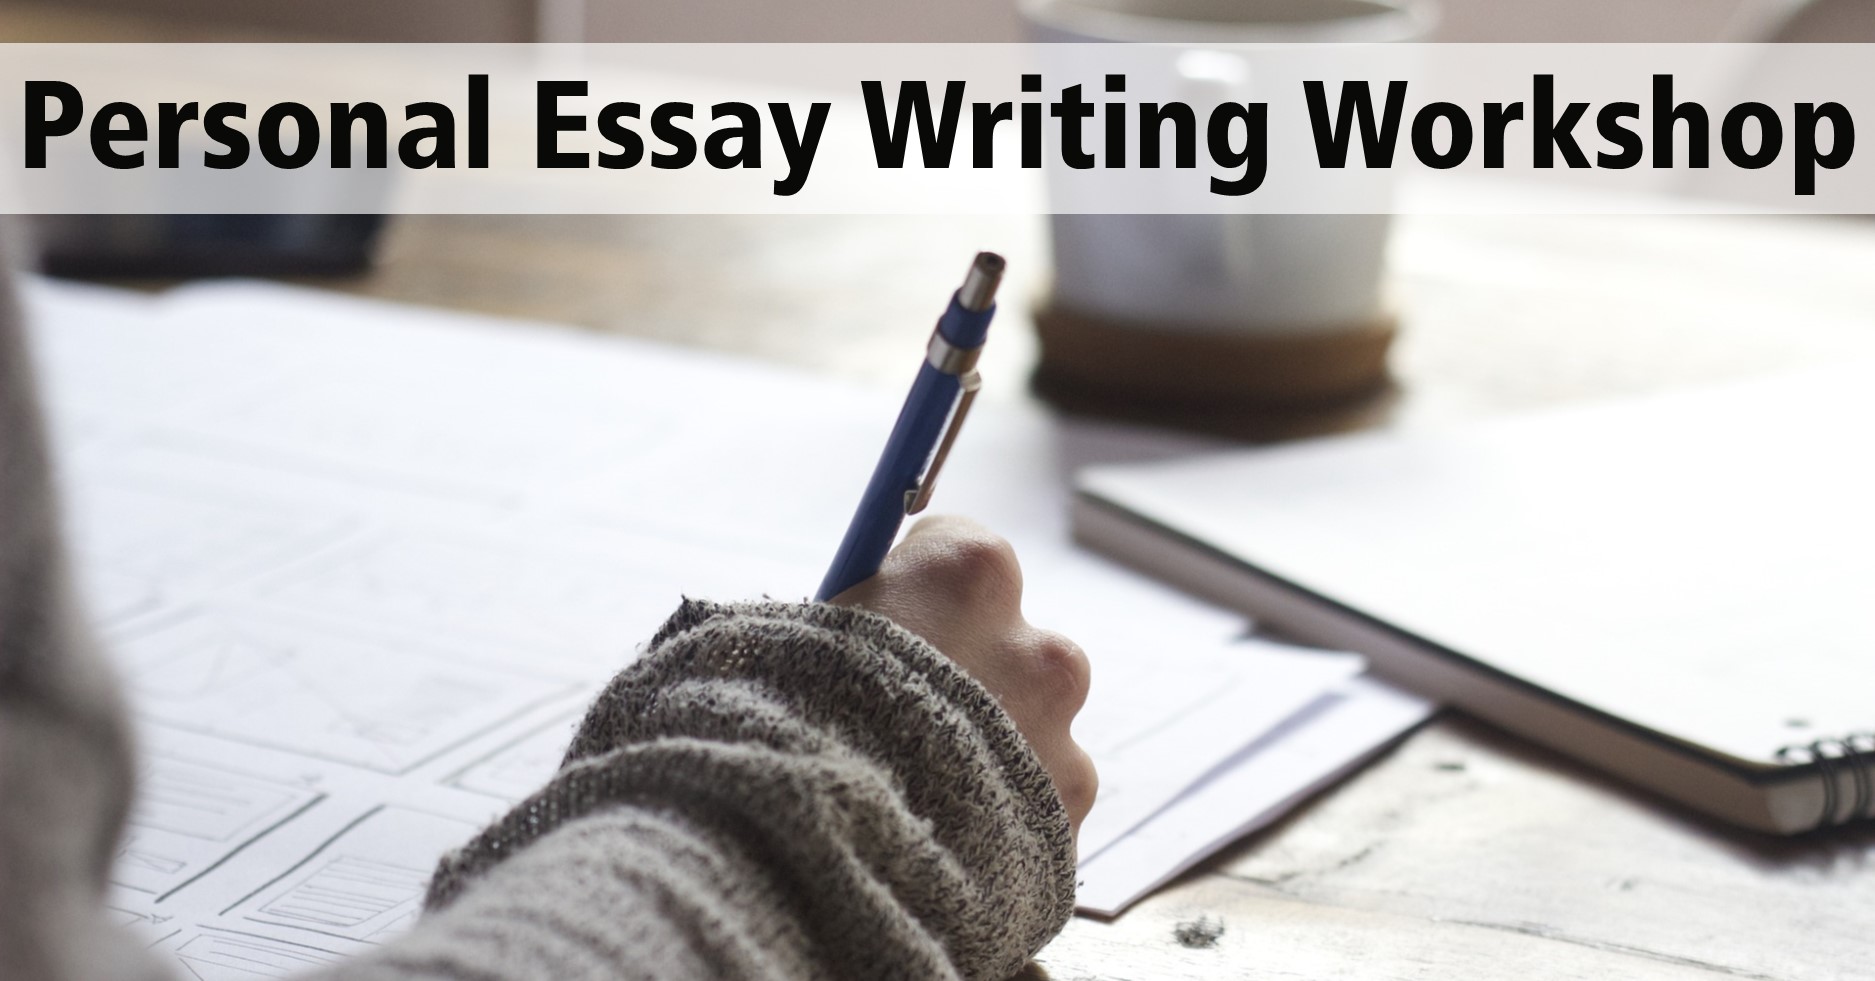 Image of person writing in a journal, and text that says "Personal Essay Writing Workshop"